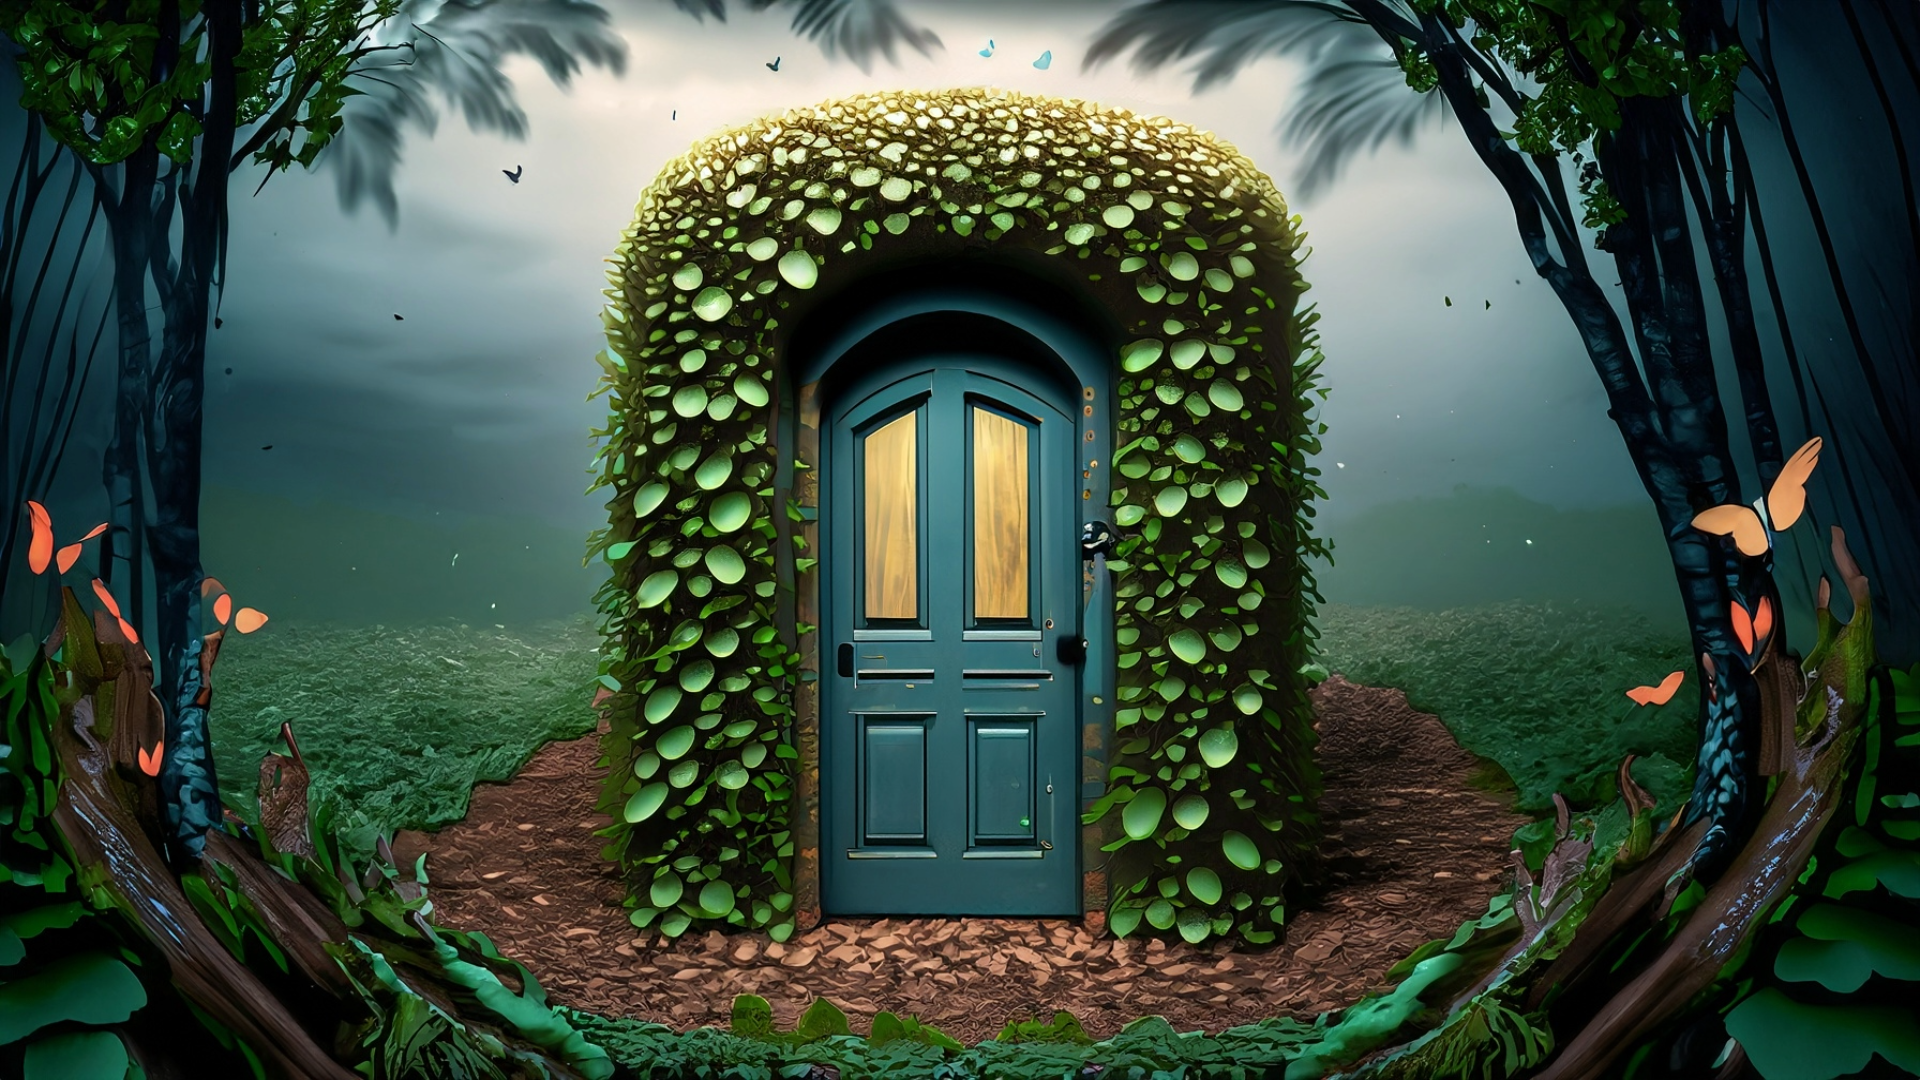 Enchanted Forest Images Background HD|| Small Door In An Enchanted forest ||